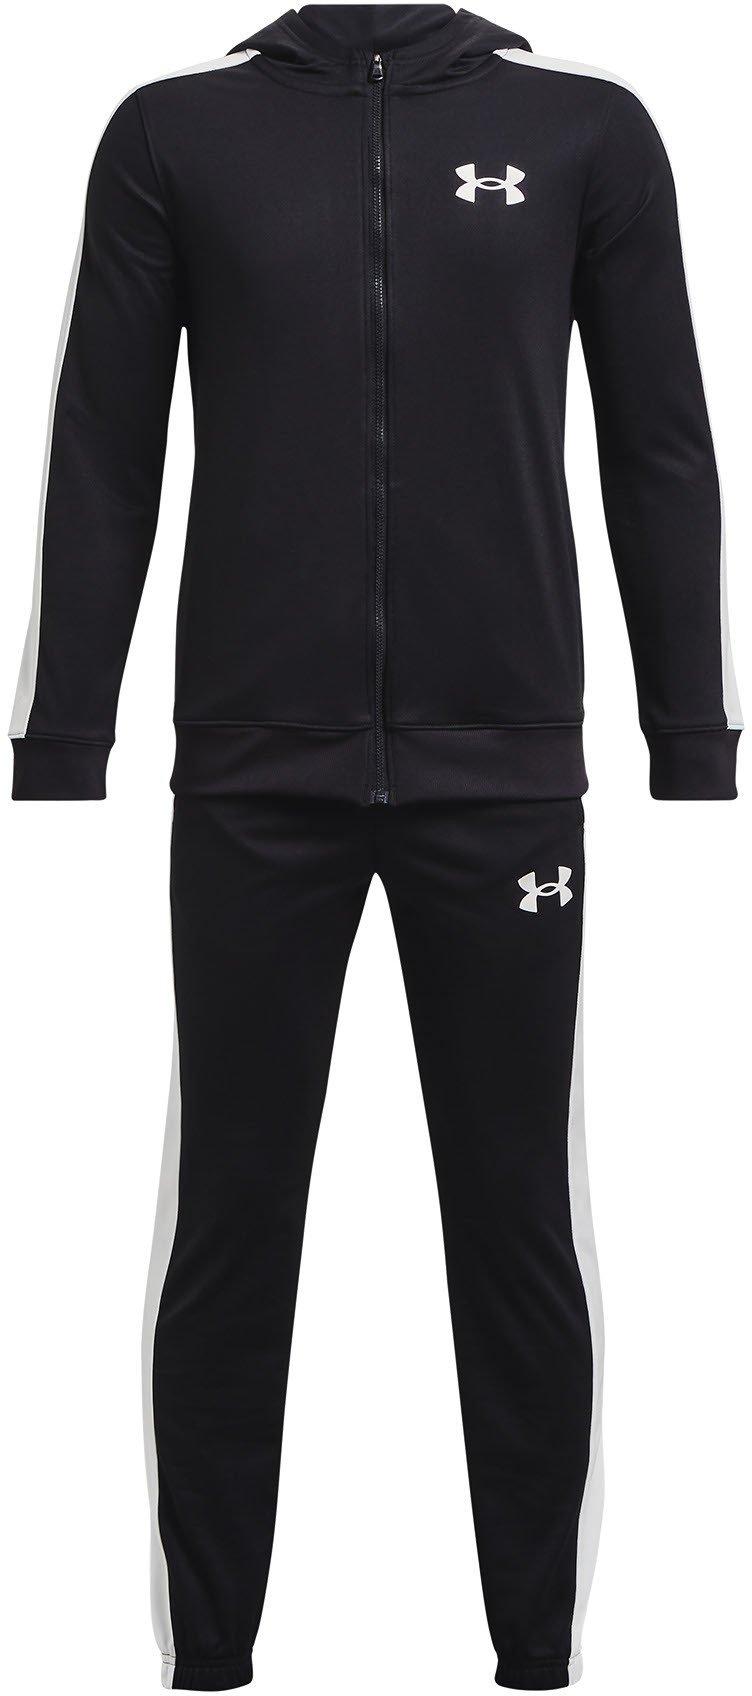 Under Armour Knit Hooded Track Suit-BLK XL